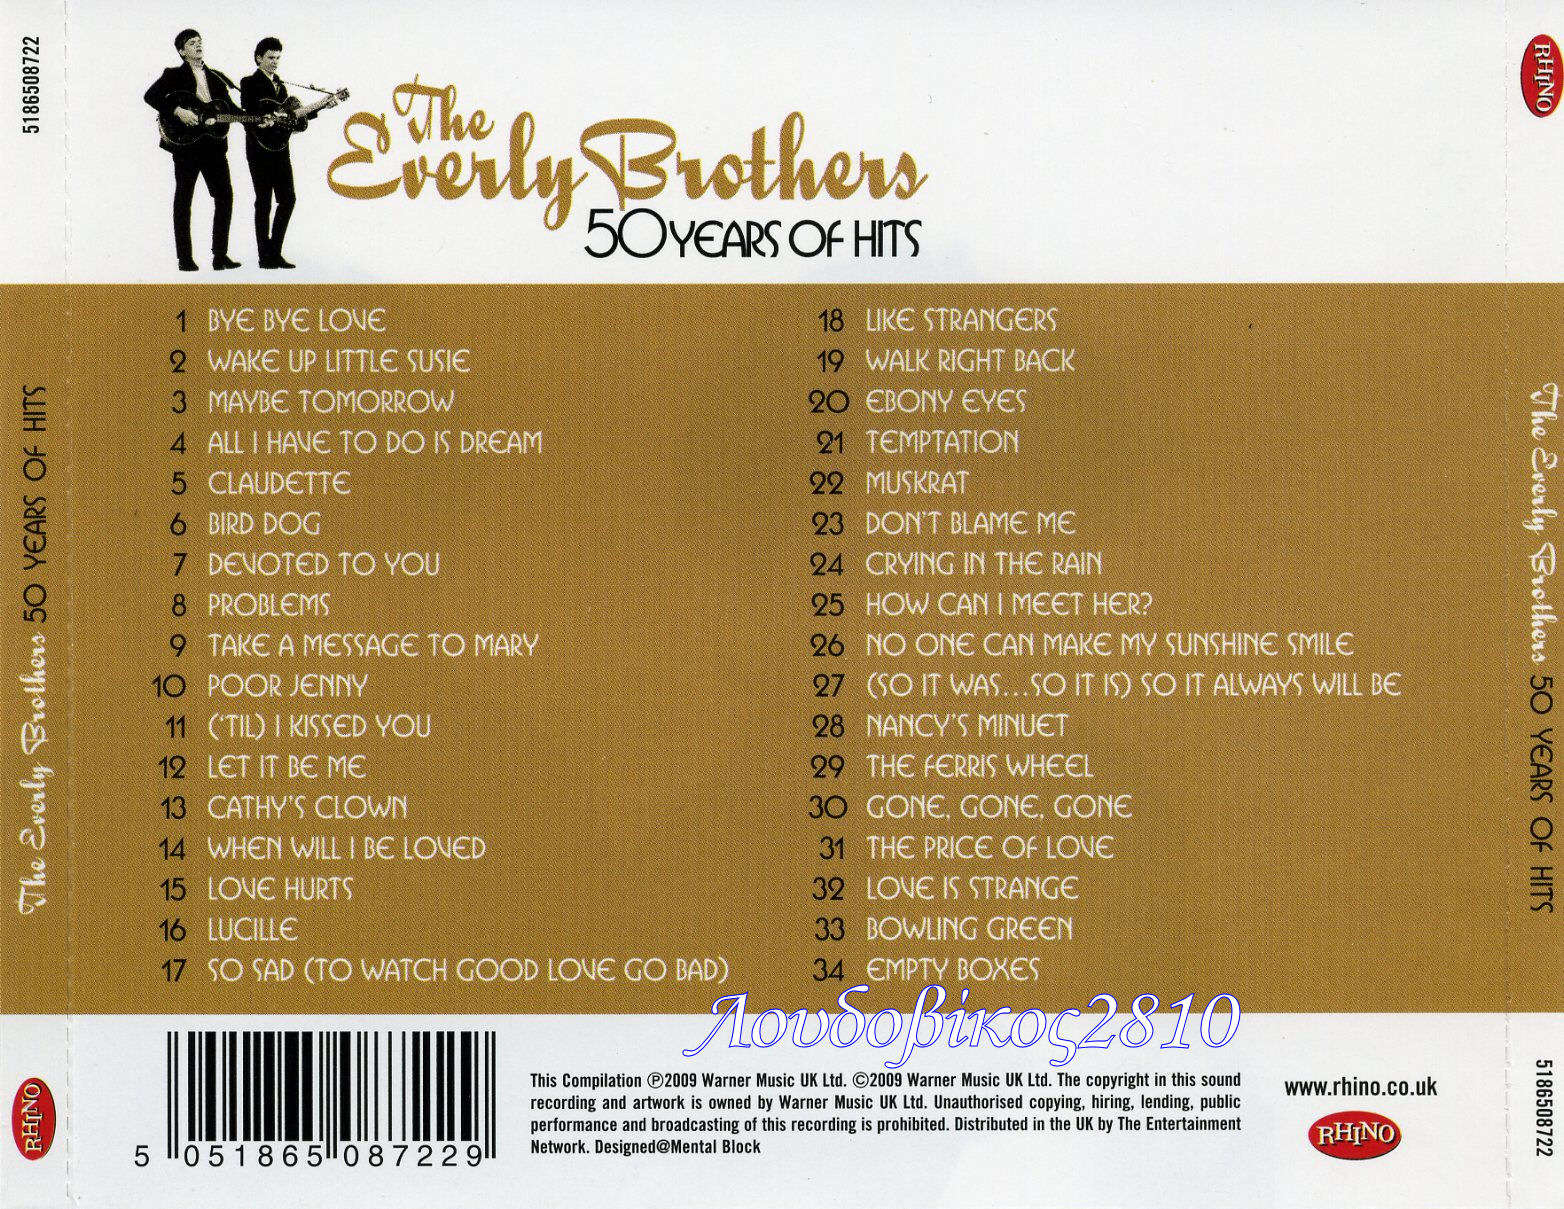 Брату 50 песни. Everly brothers – 50 years of Hits. The Everly brothers all i have to do is Dream 50 years of Hits. 50 And 50 brothers 80. The Everly brothers all i have to do is Dream 50 years.